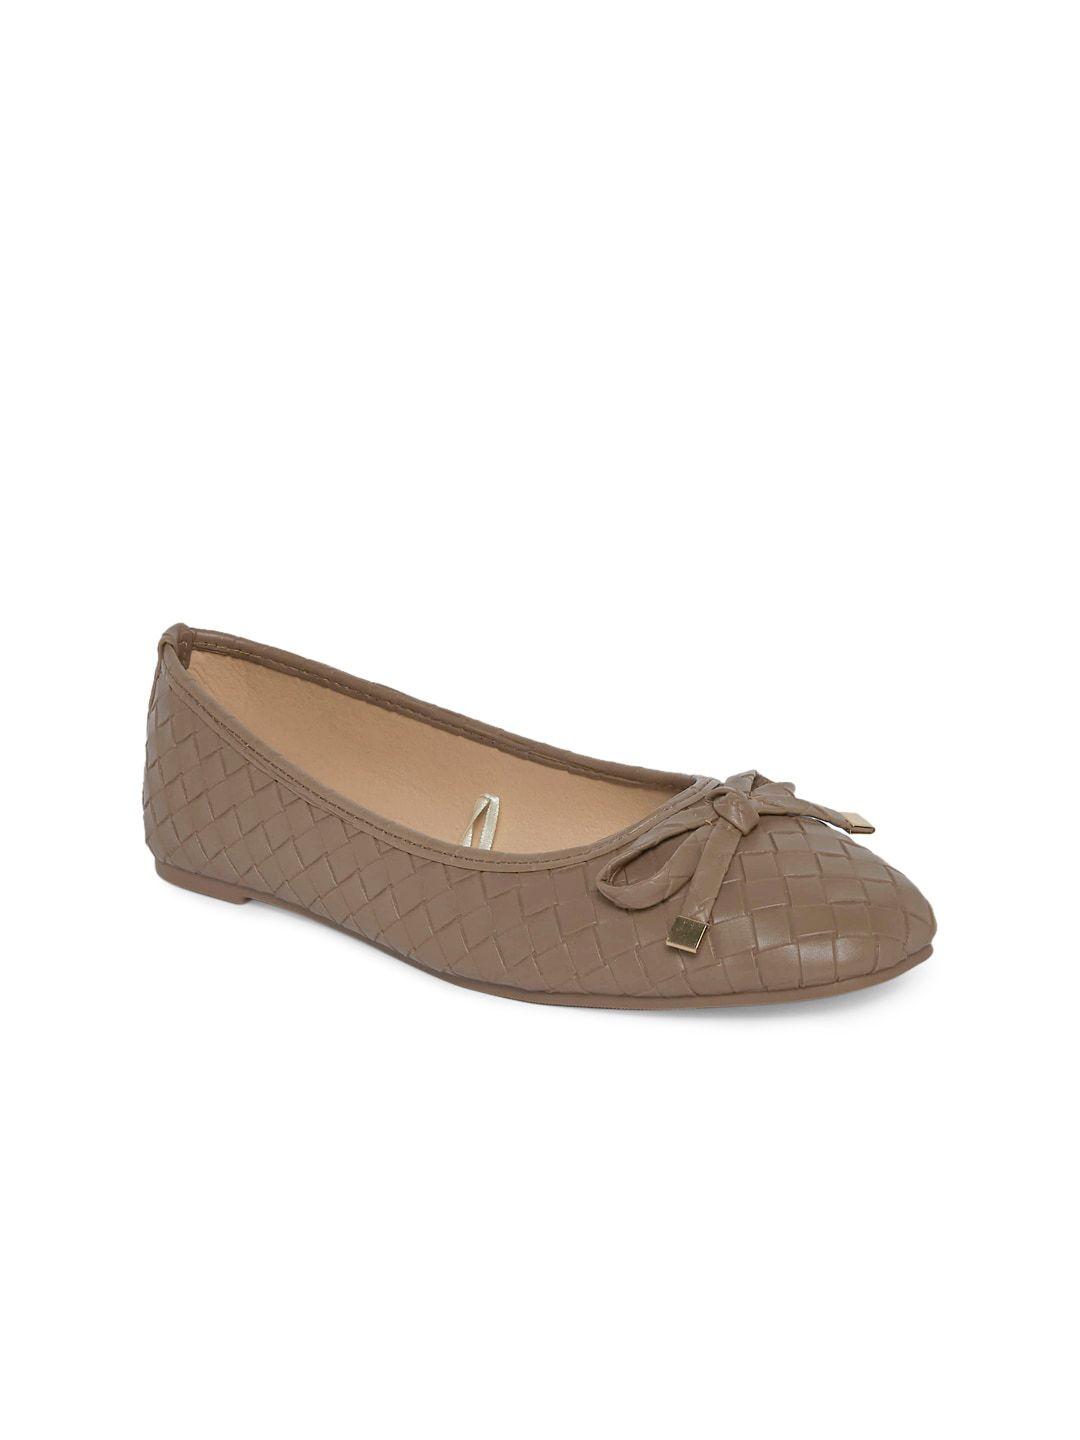 forever glam by pantaloons women brown textured ballerinas with bows flats